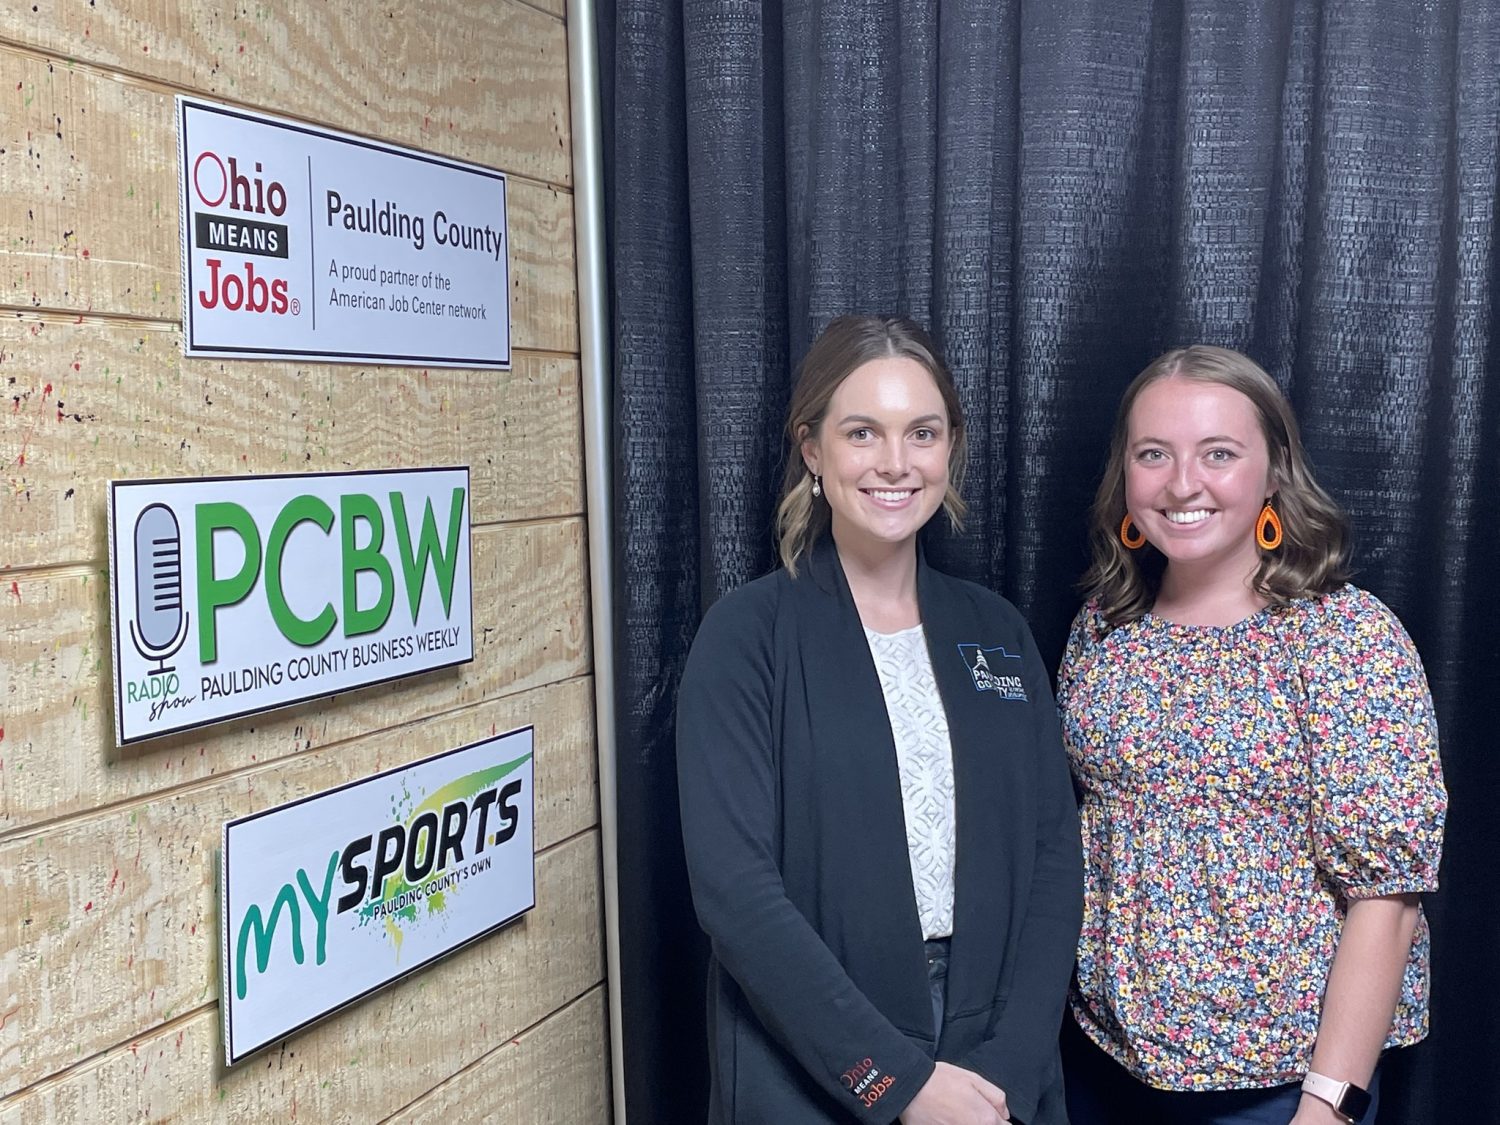 Next guest on Paulding County Business Weekly: Young Professionals of Paulding County